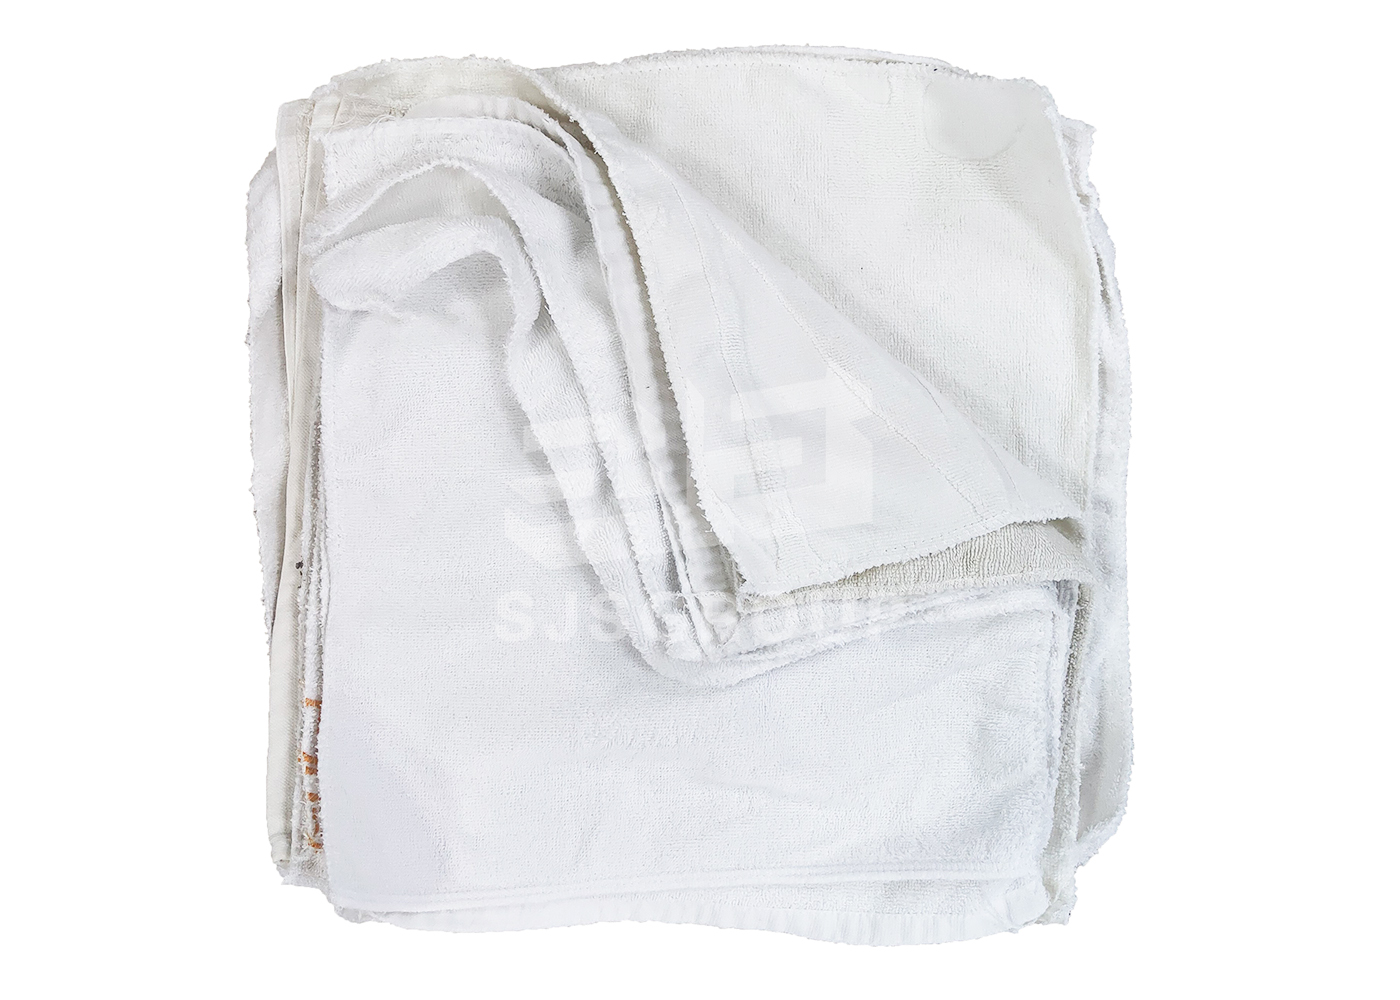 White Towel Rags-White Little Square Towel Cotton Rags(Sewing)